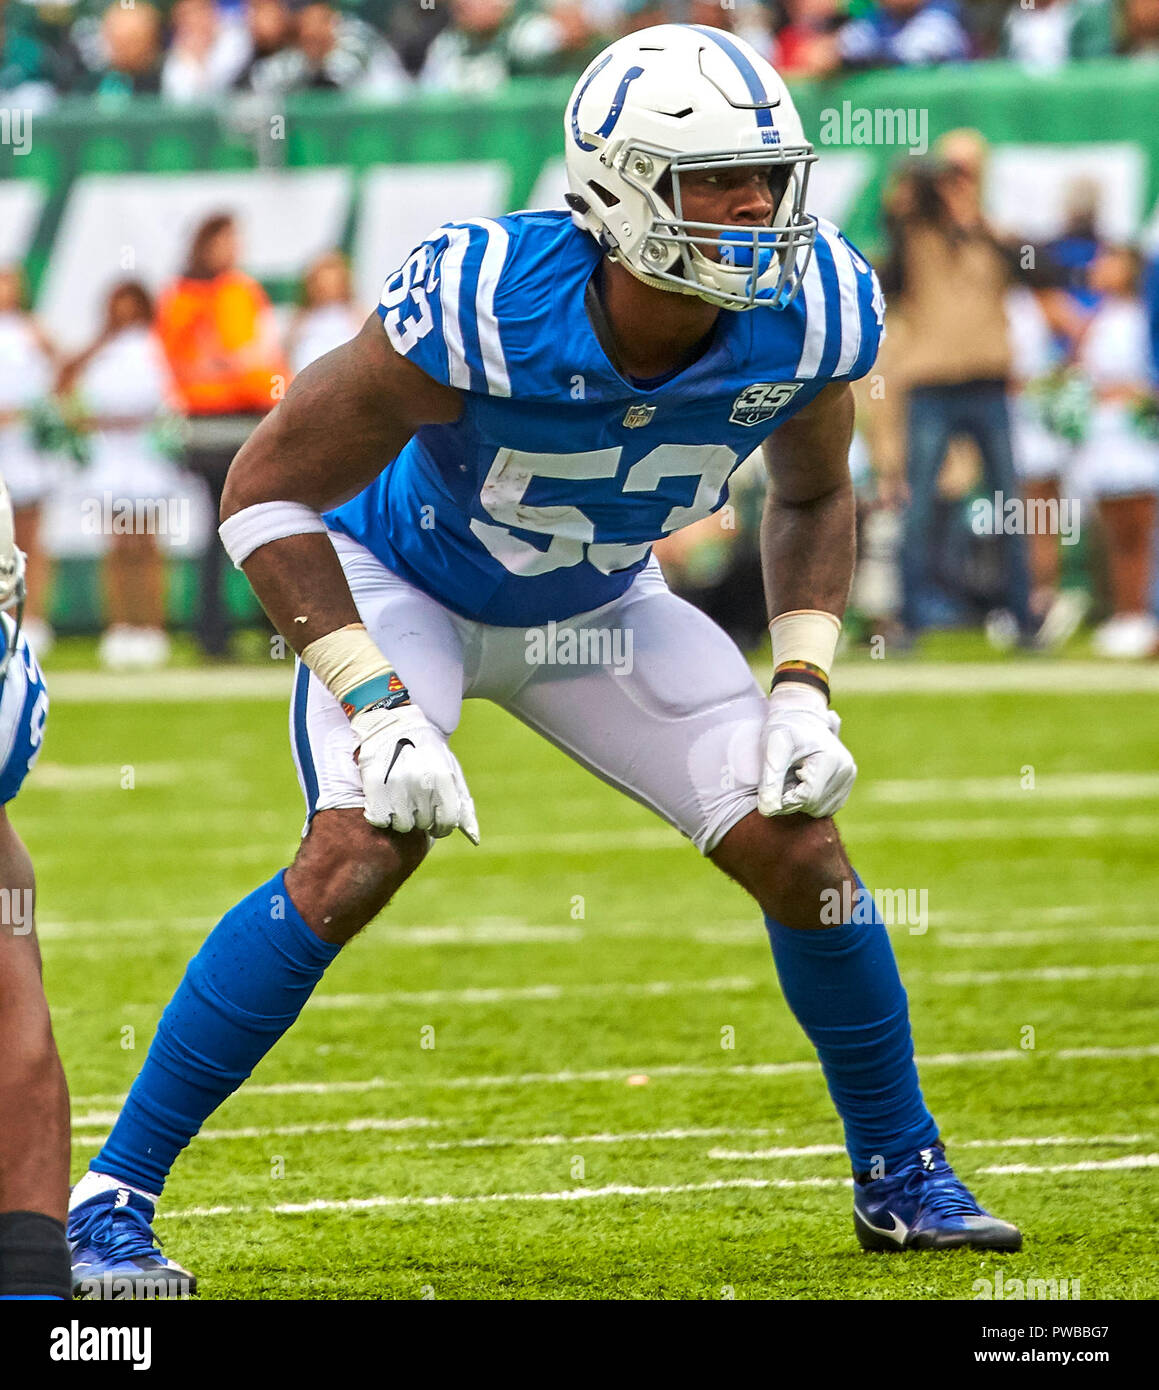 East Rutherford, New Jersey, USA. 14th Oct, 2018. Indianapolis Colts  linebacker Darius Leonard (53) during a NFL game between the Indianapolis  Colts and the New York Jets at MetLife Stadium in East